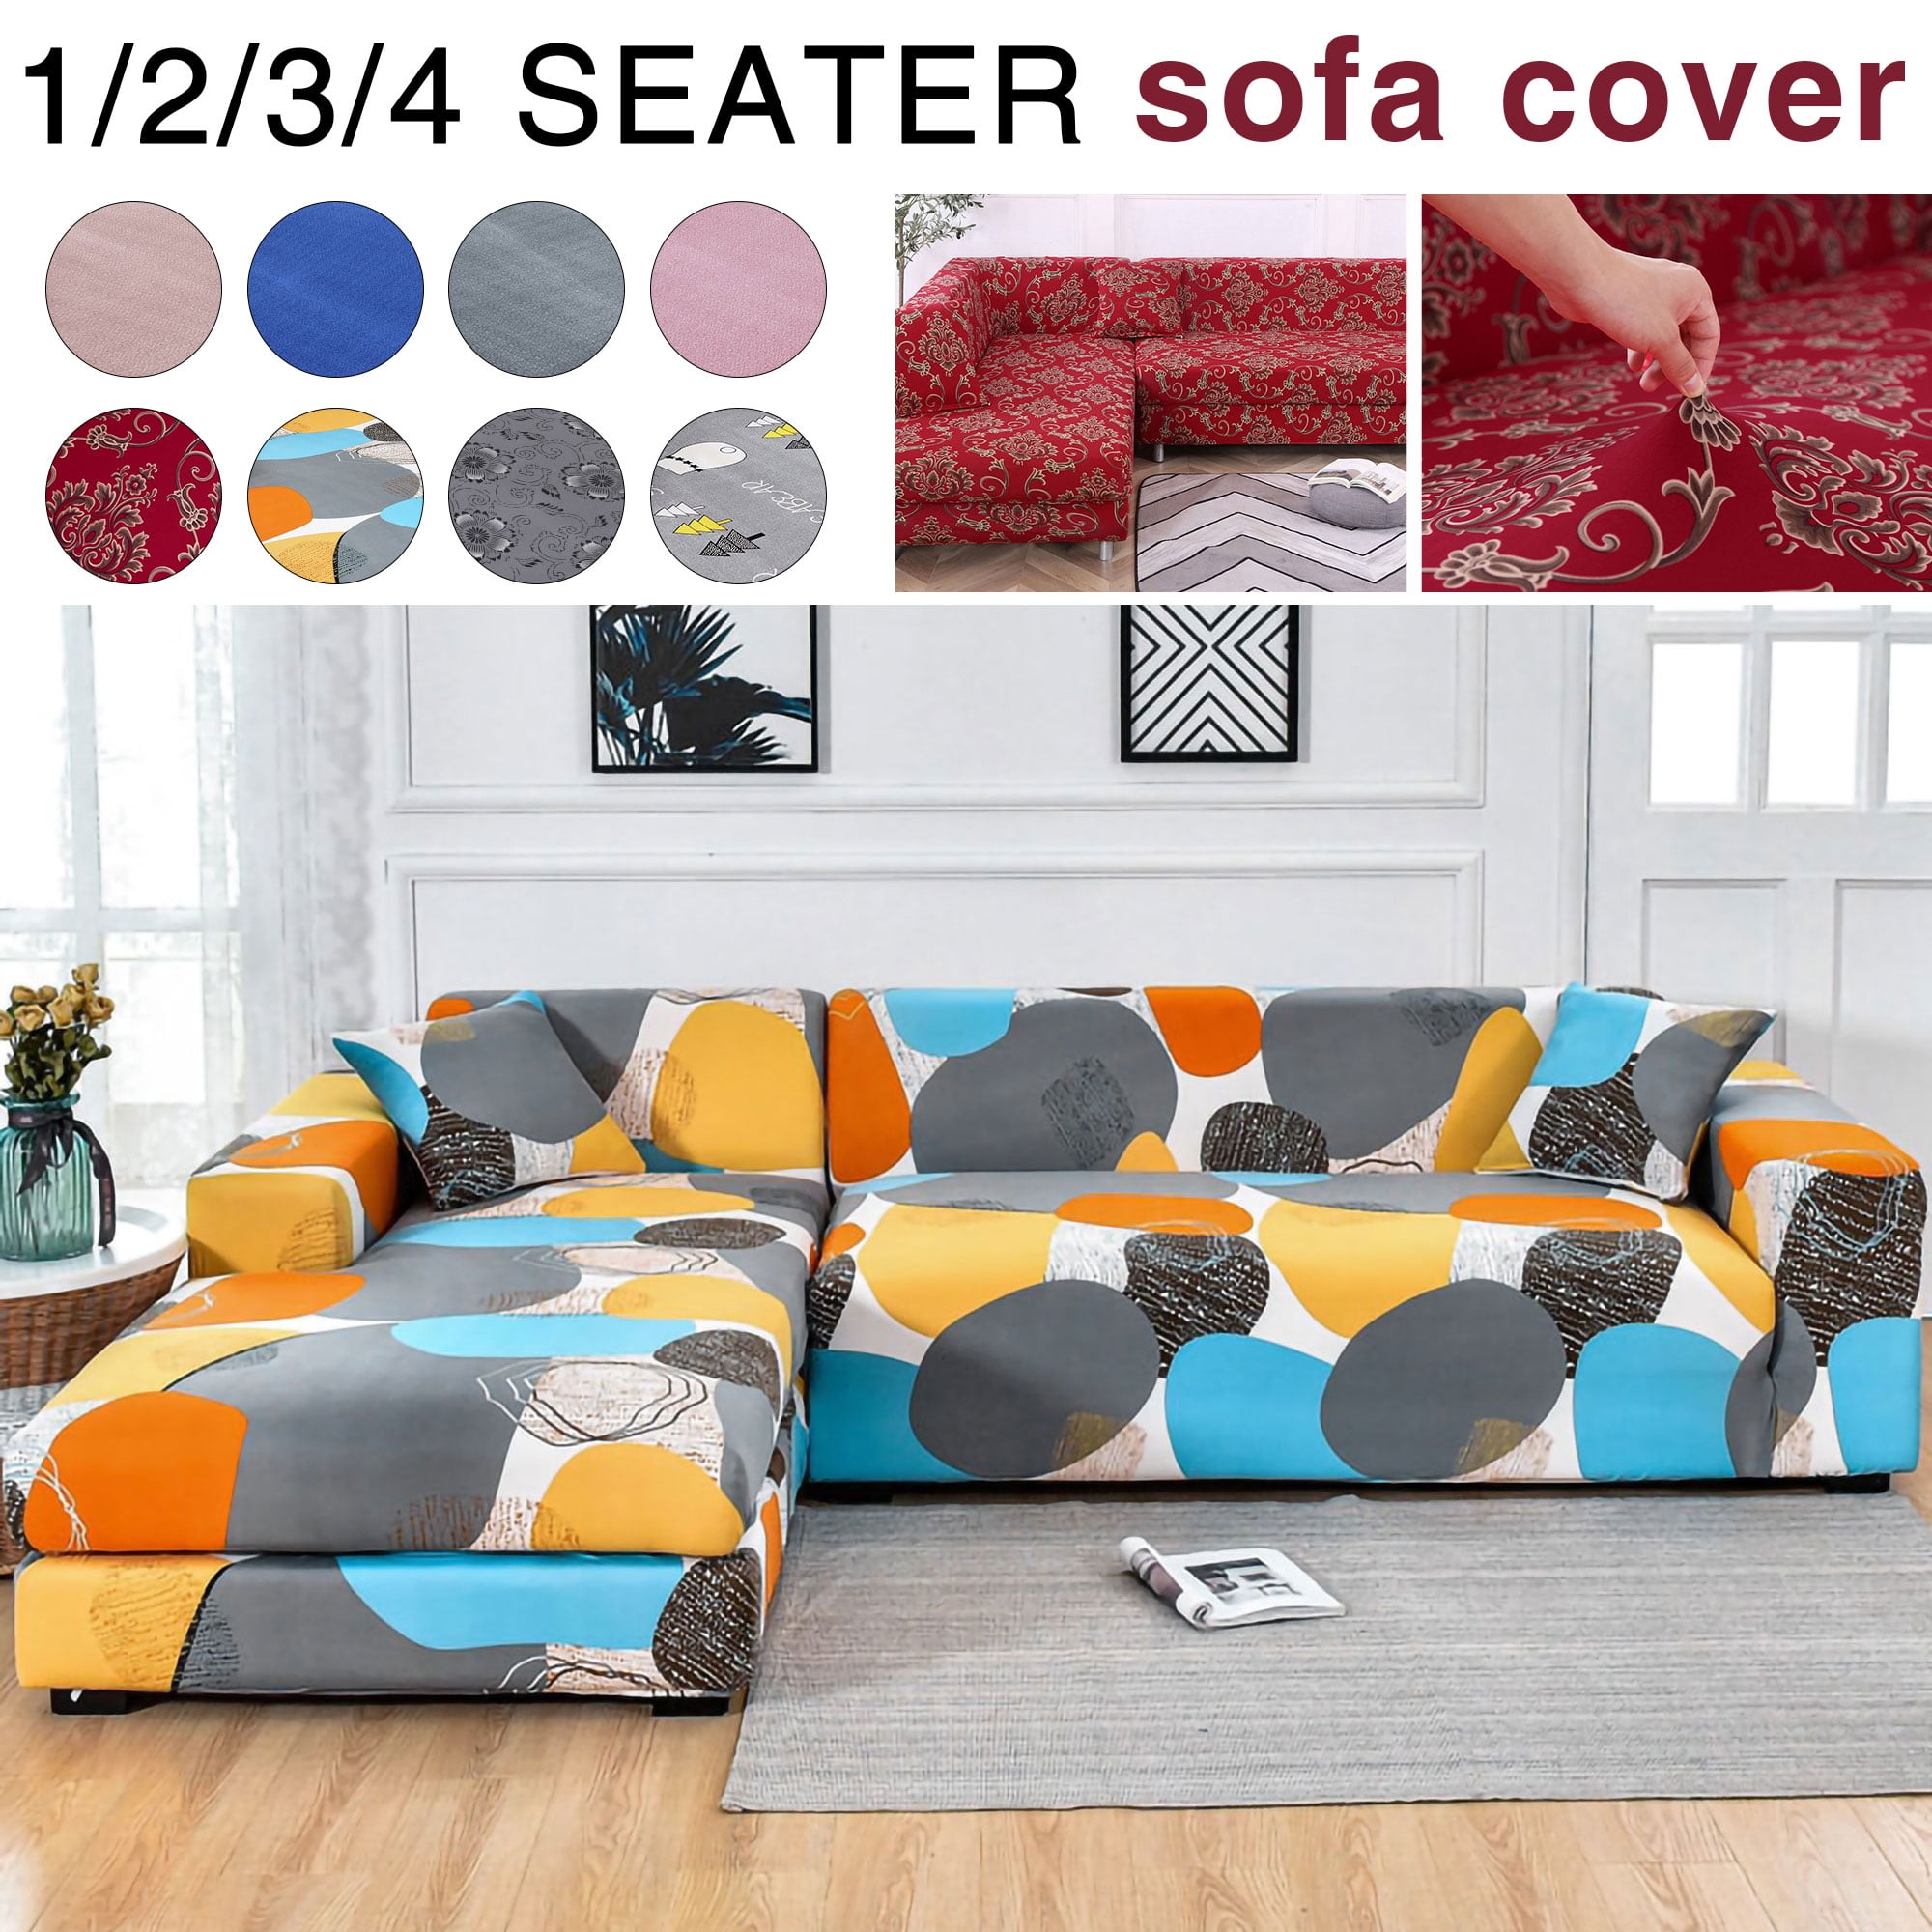 Details about   Elastic Stretch Sofa Cover for Living Room L Shape Armchair Cover 1/2/3/4 Seater 